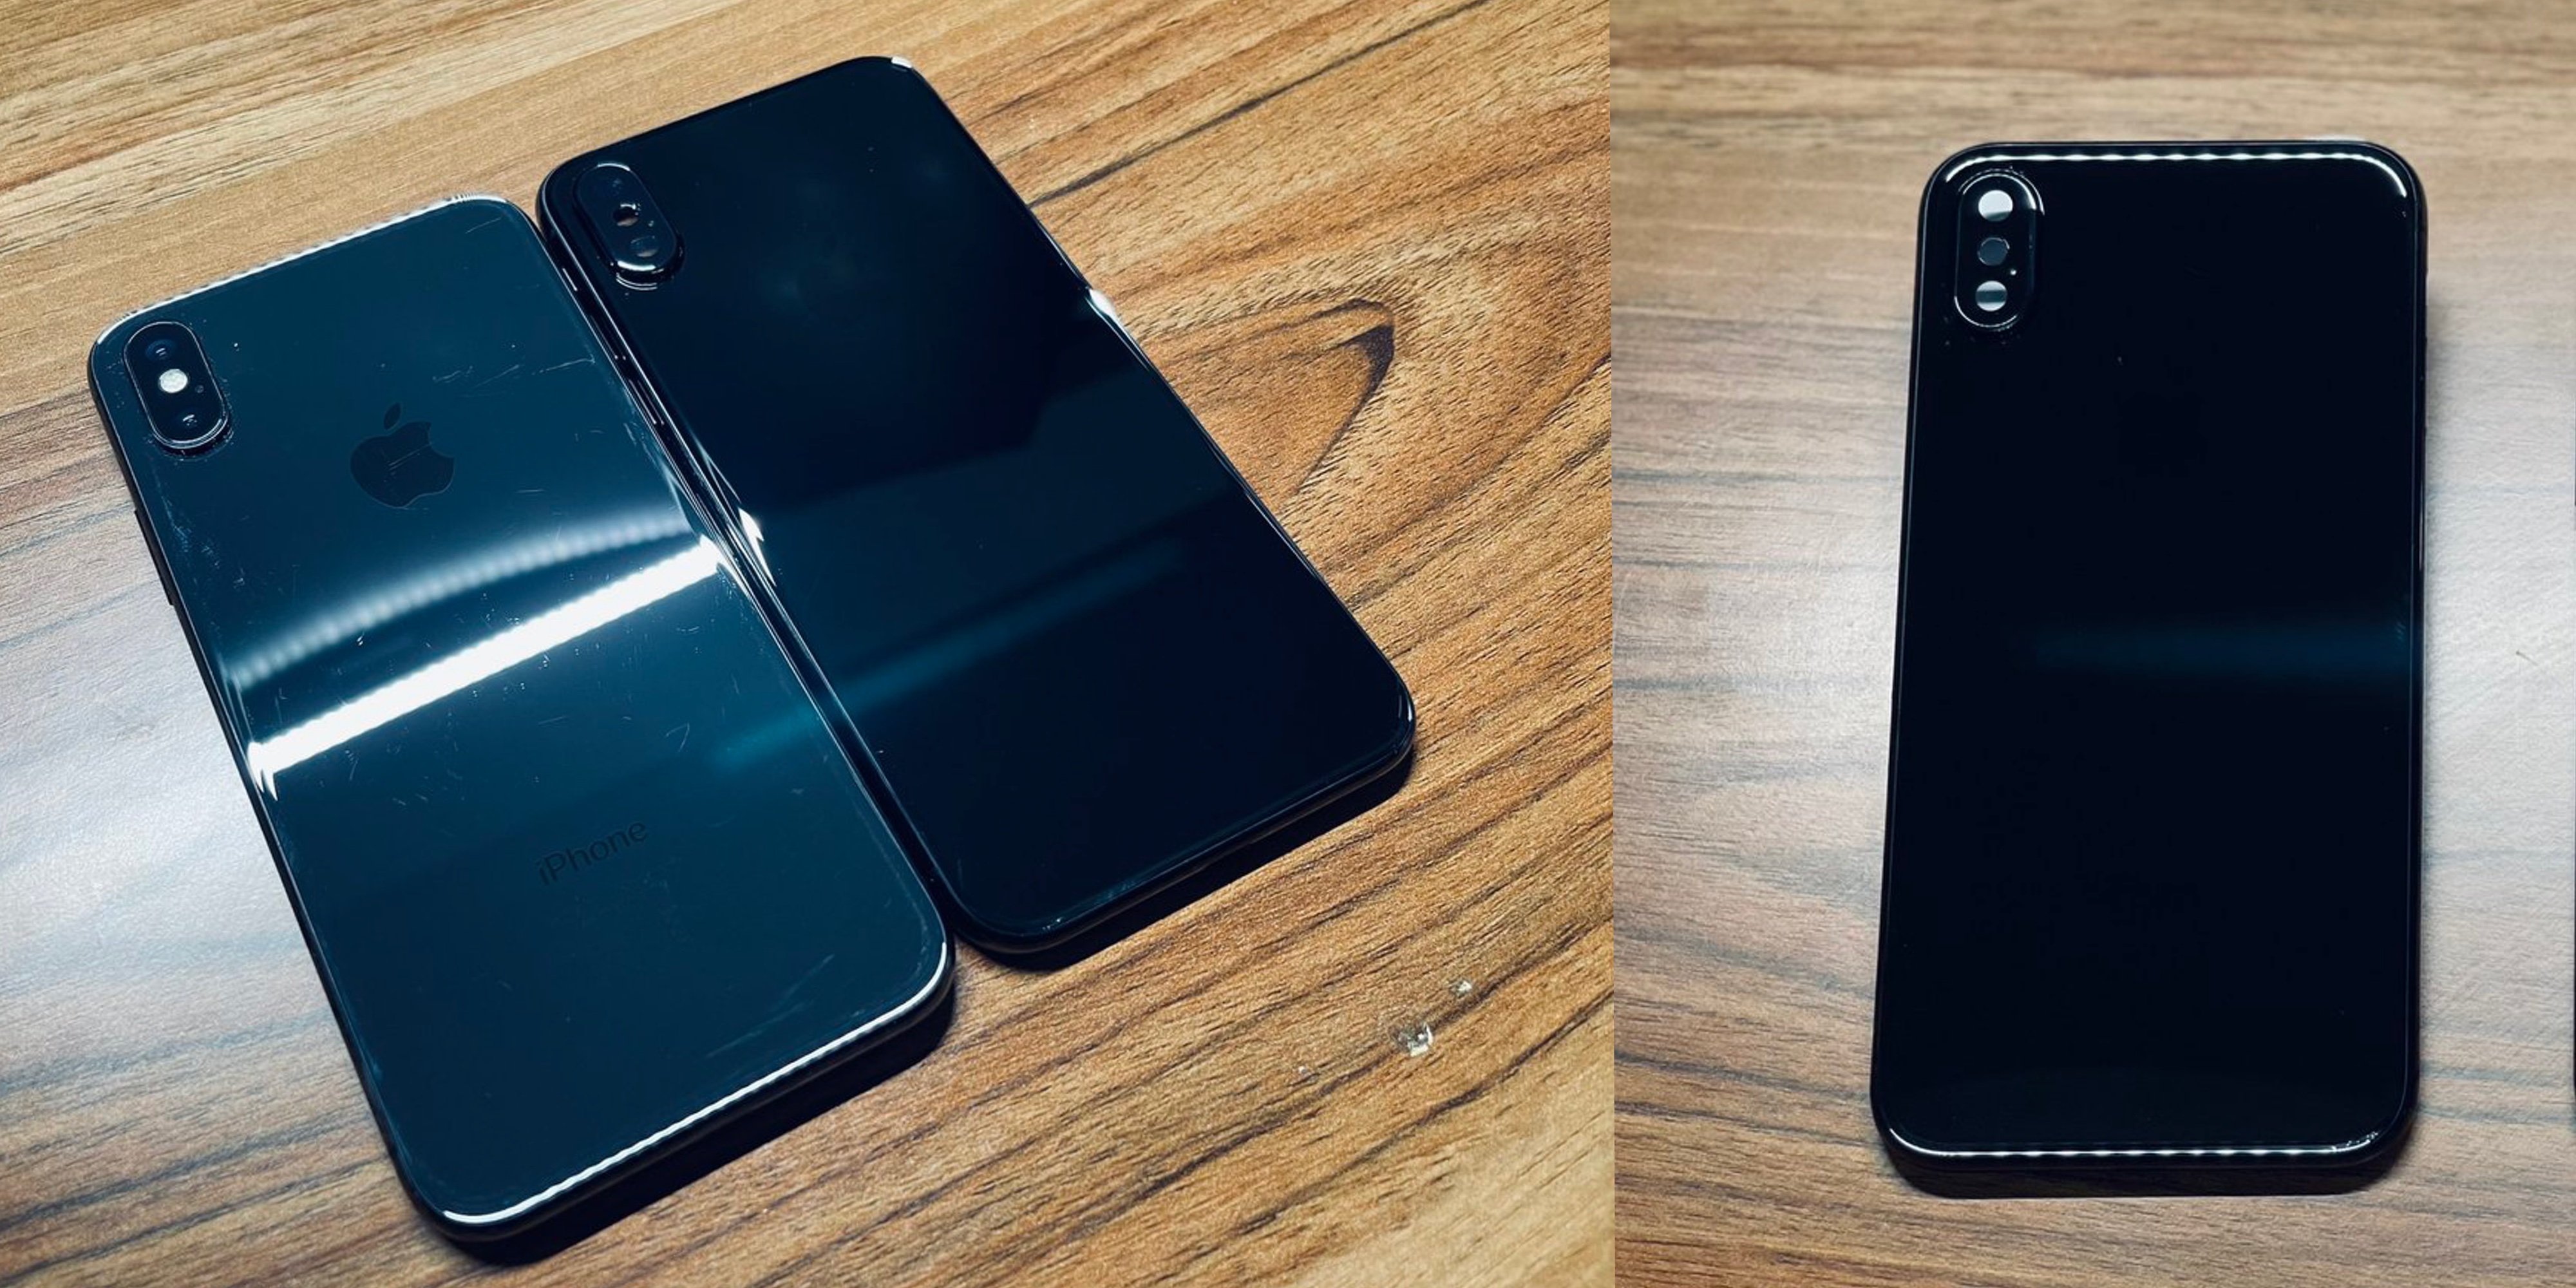 New Images Show Prototype Iphone X In Unreleased Jet Black Finish 9to5mac